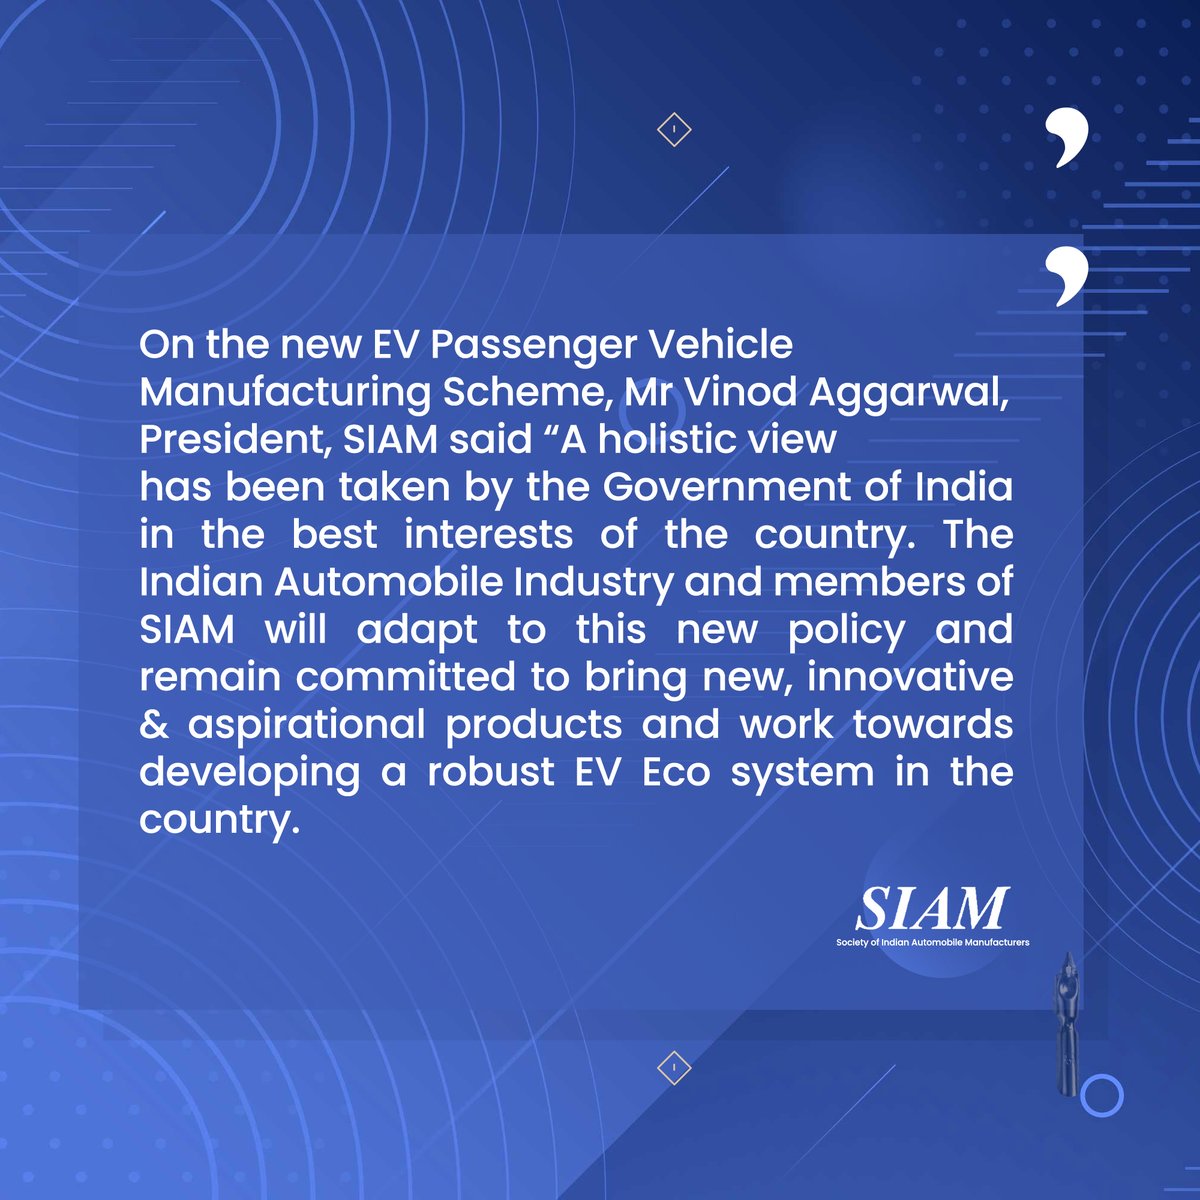 Mr Vinod Aggarwal, President SIAM sharing his insights on the new EV Passenger Vehicle Manufacturing Scheme.